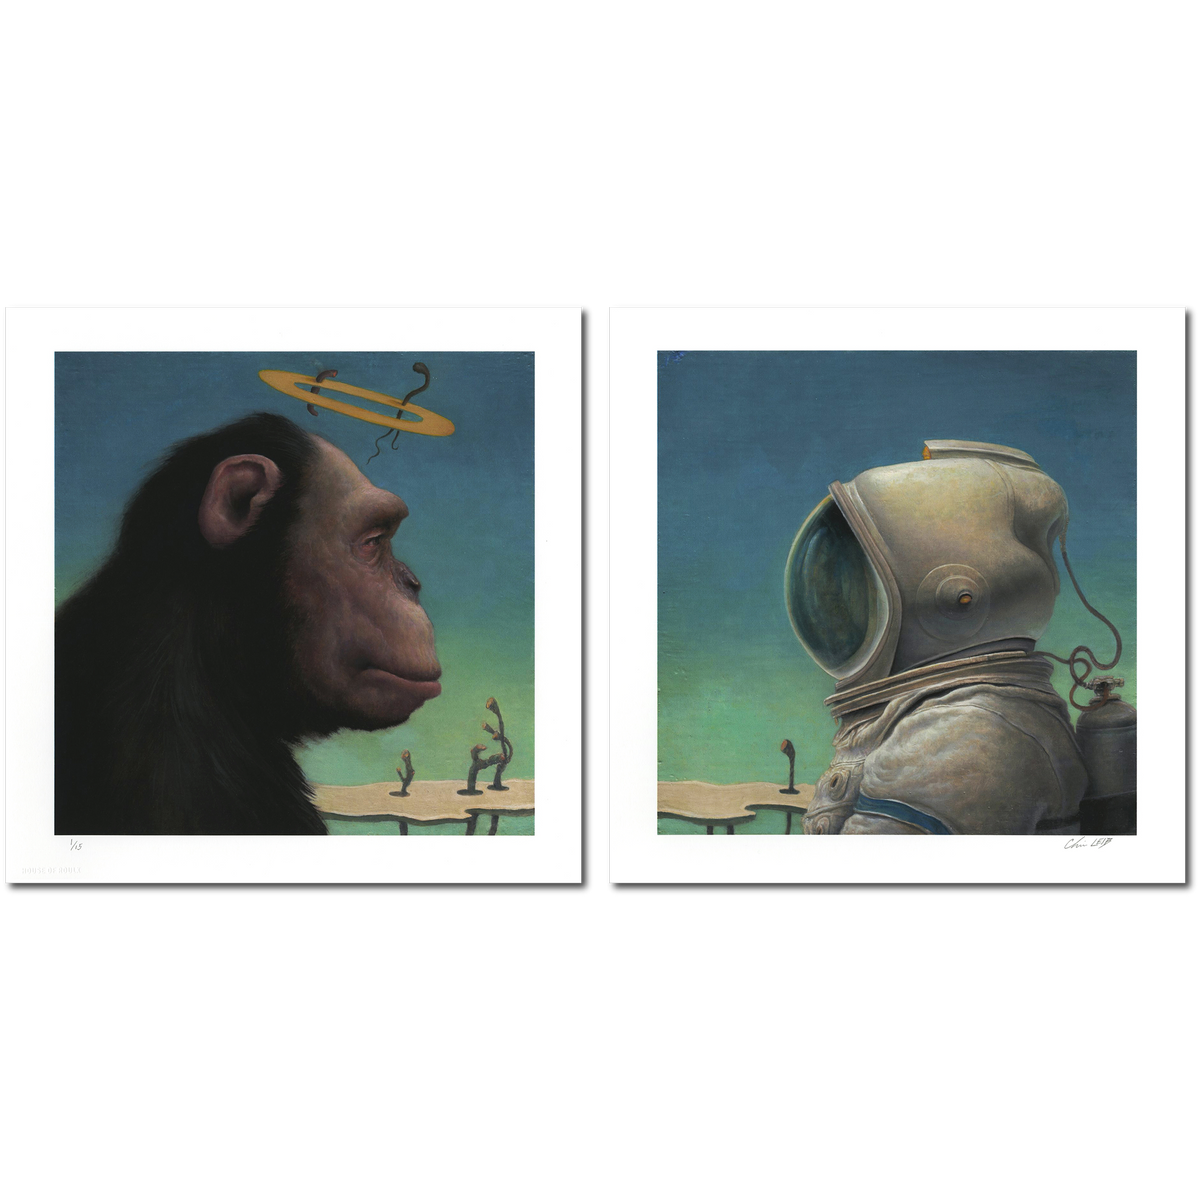 Chris Leib &quot;Uncommon Agreement&quot; - Limited Diptych Edition of 15 - 12 x 12&quot; Each